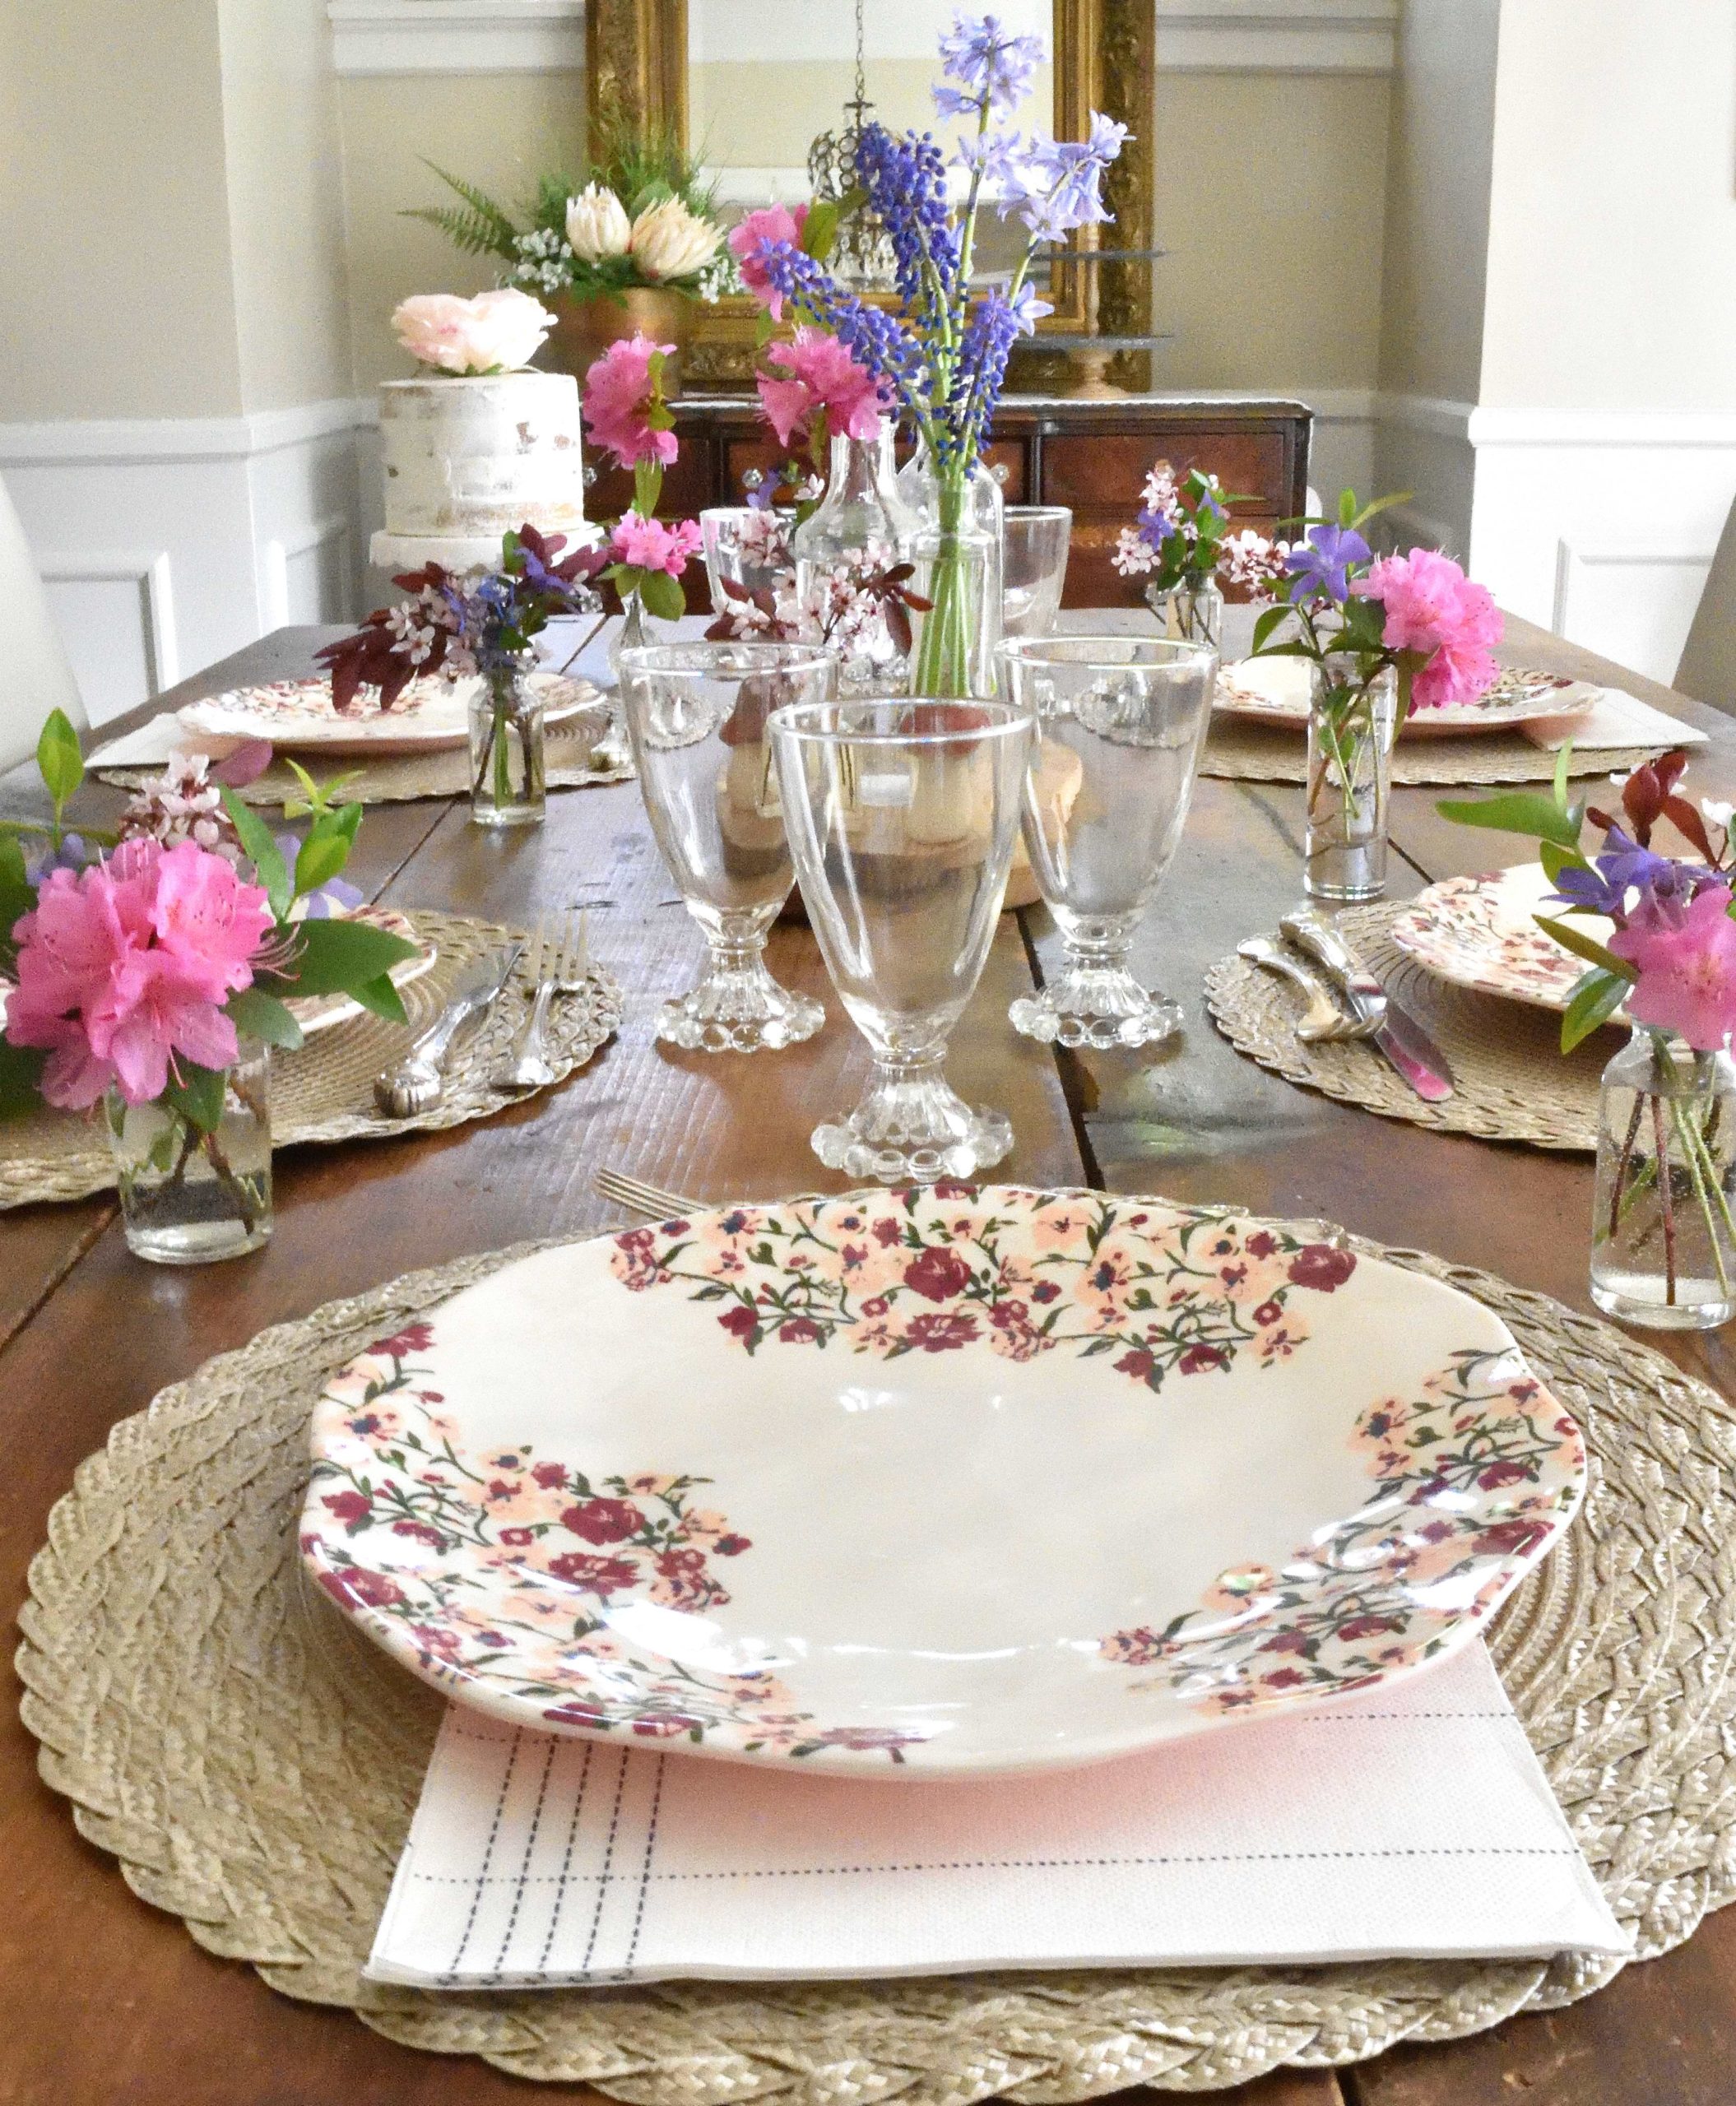 A simple springtime table for Mother's Day celebrations!